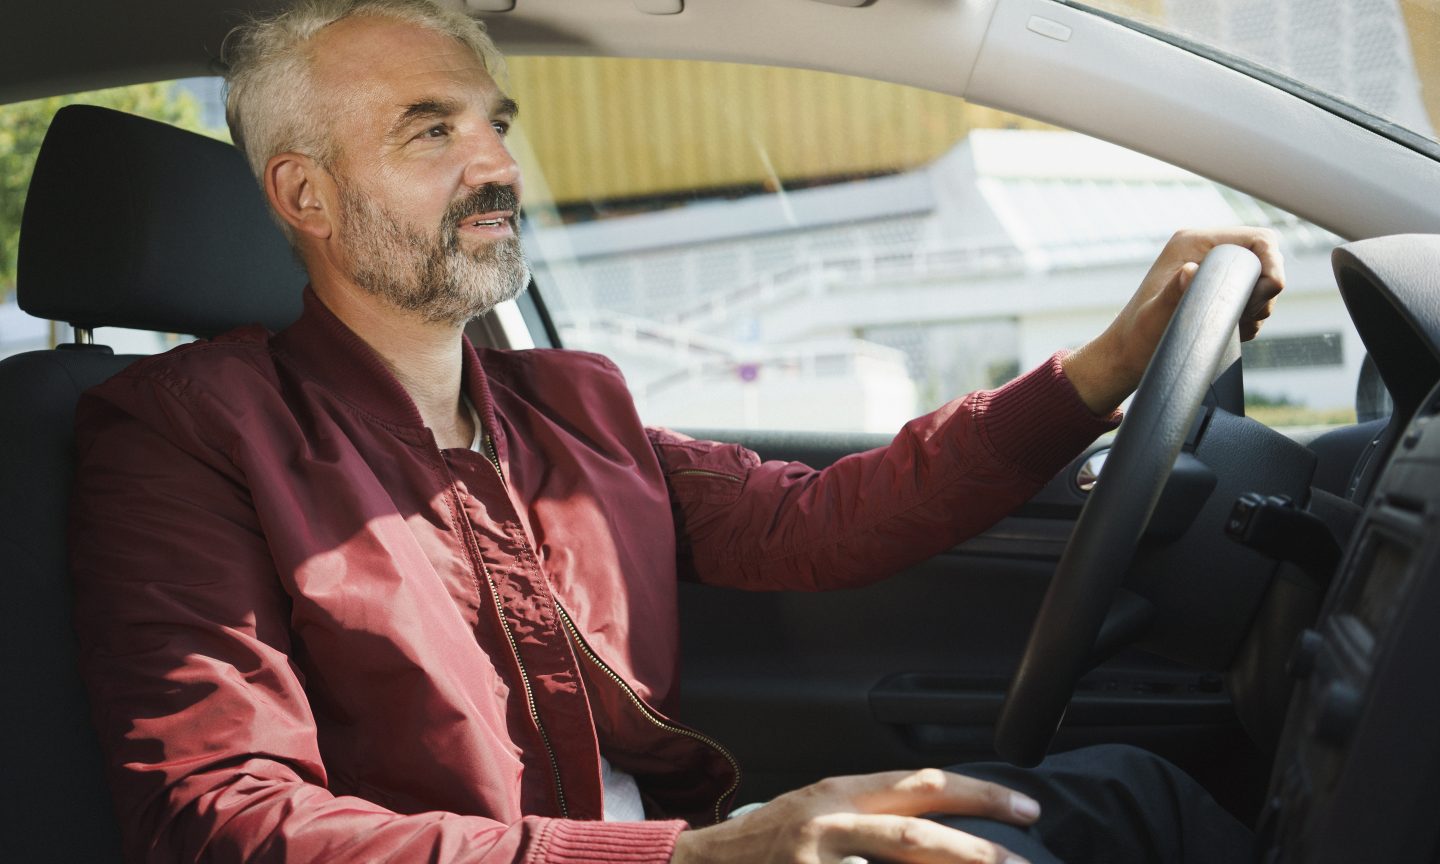 Good2Go Auto Insurance Review 2022: Pros and Cons - NerdWallet